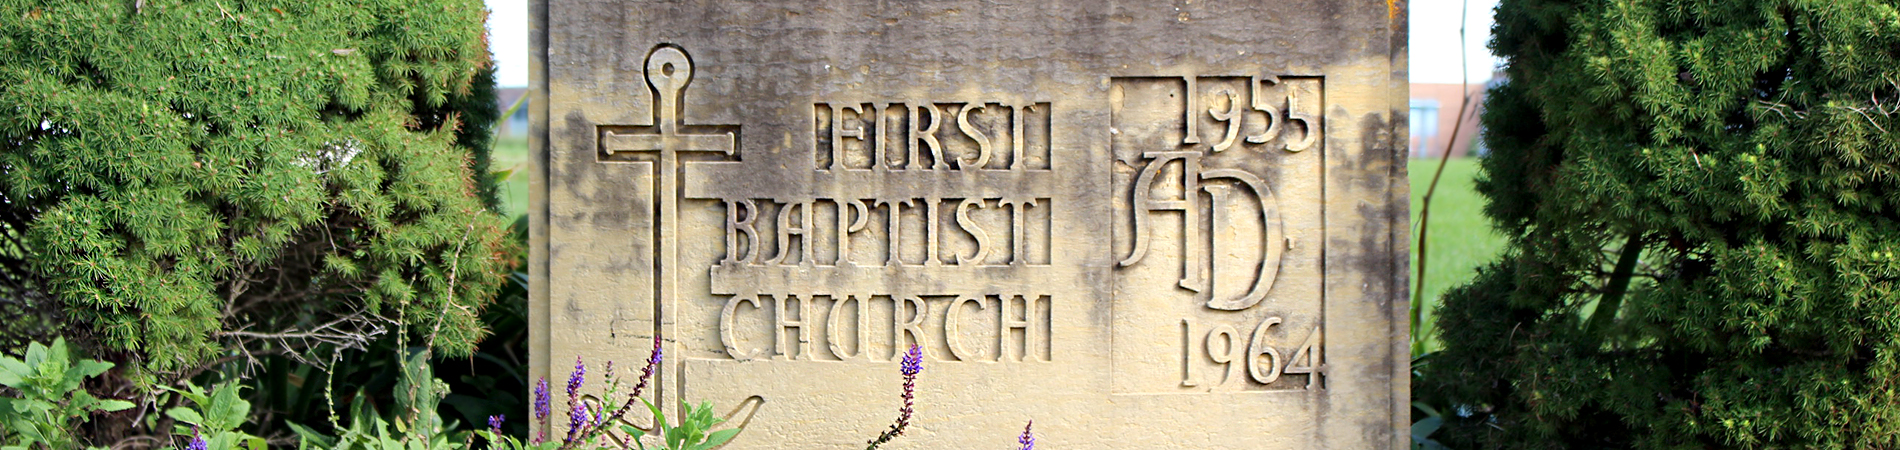 The history of First Baptist Church